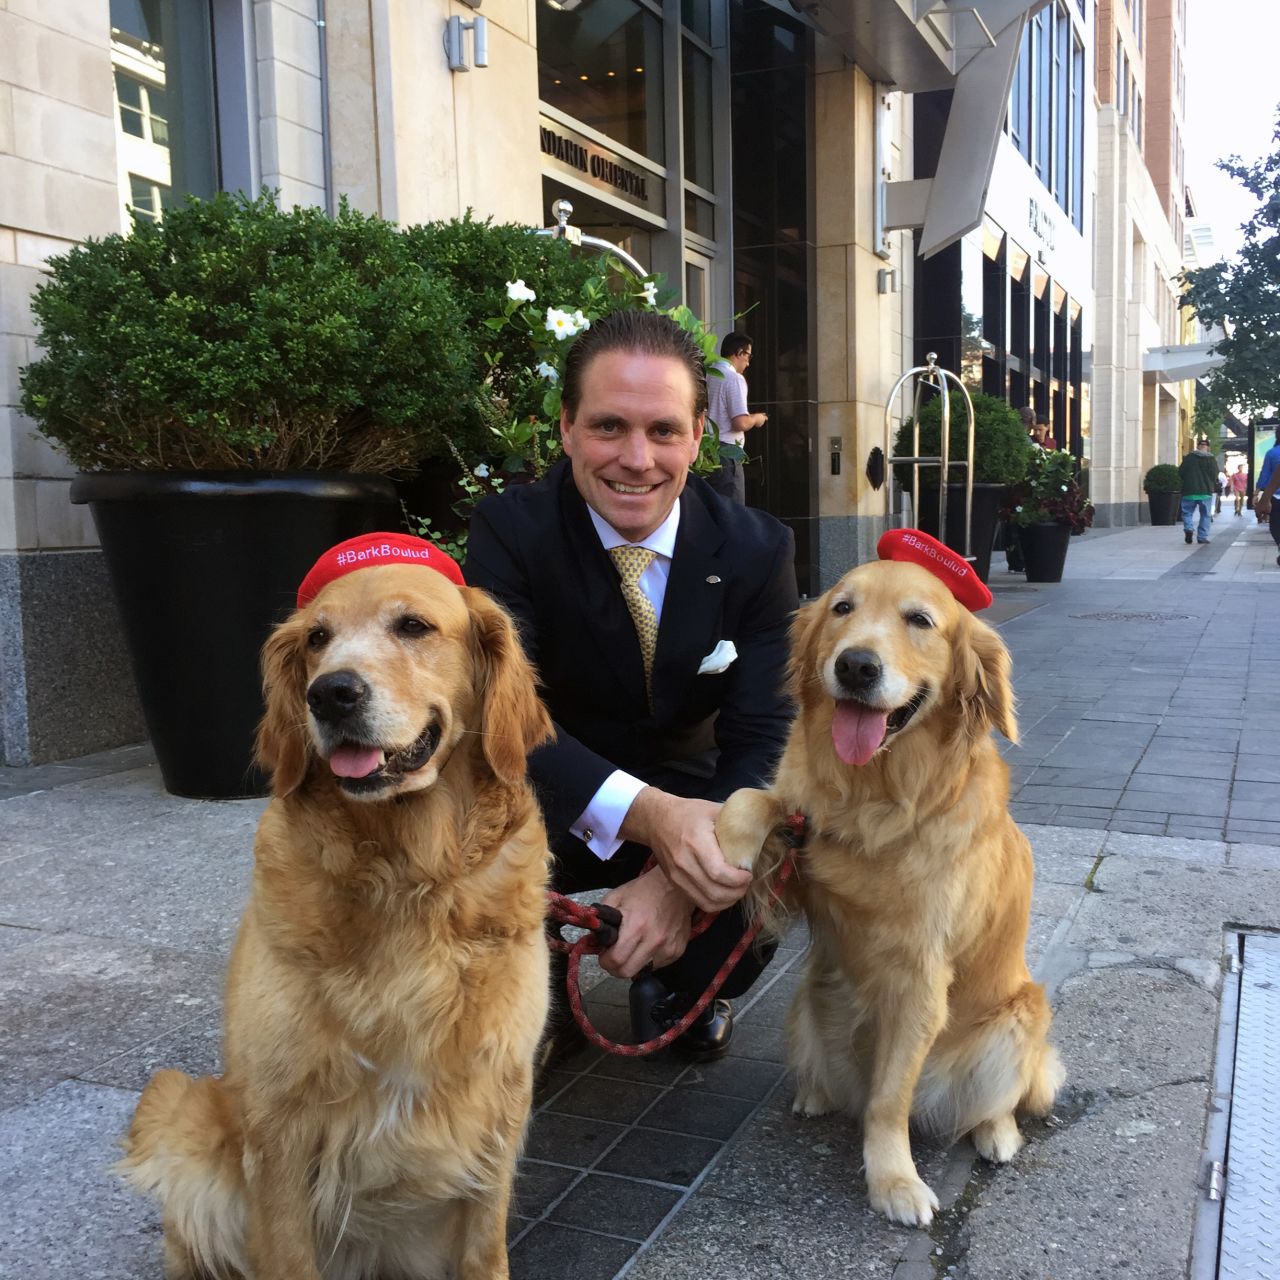 <strong>Mandarin Oriental Boston, Boston, USA:</strong> Boston's branch of the Mandarin Oriental is famed for its two cheerful golden retrievers: Bonnie and Tara. "They provide a warm tail-wagging welcome for all of our guests," says general manager Philipp Knuepfer.